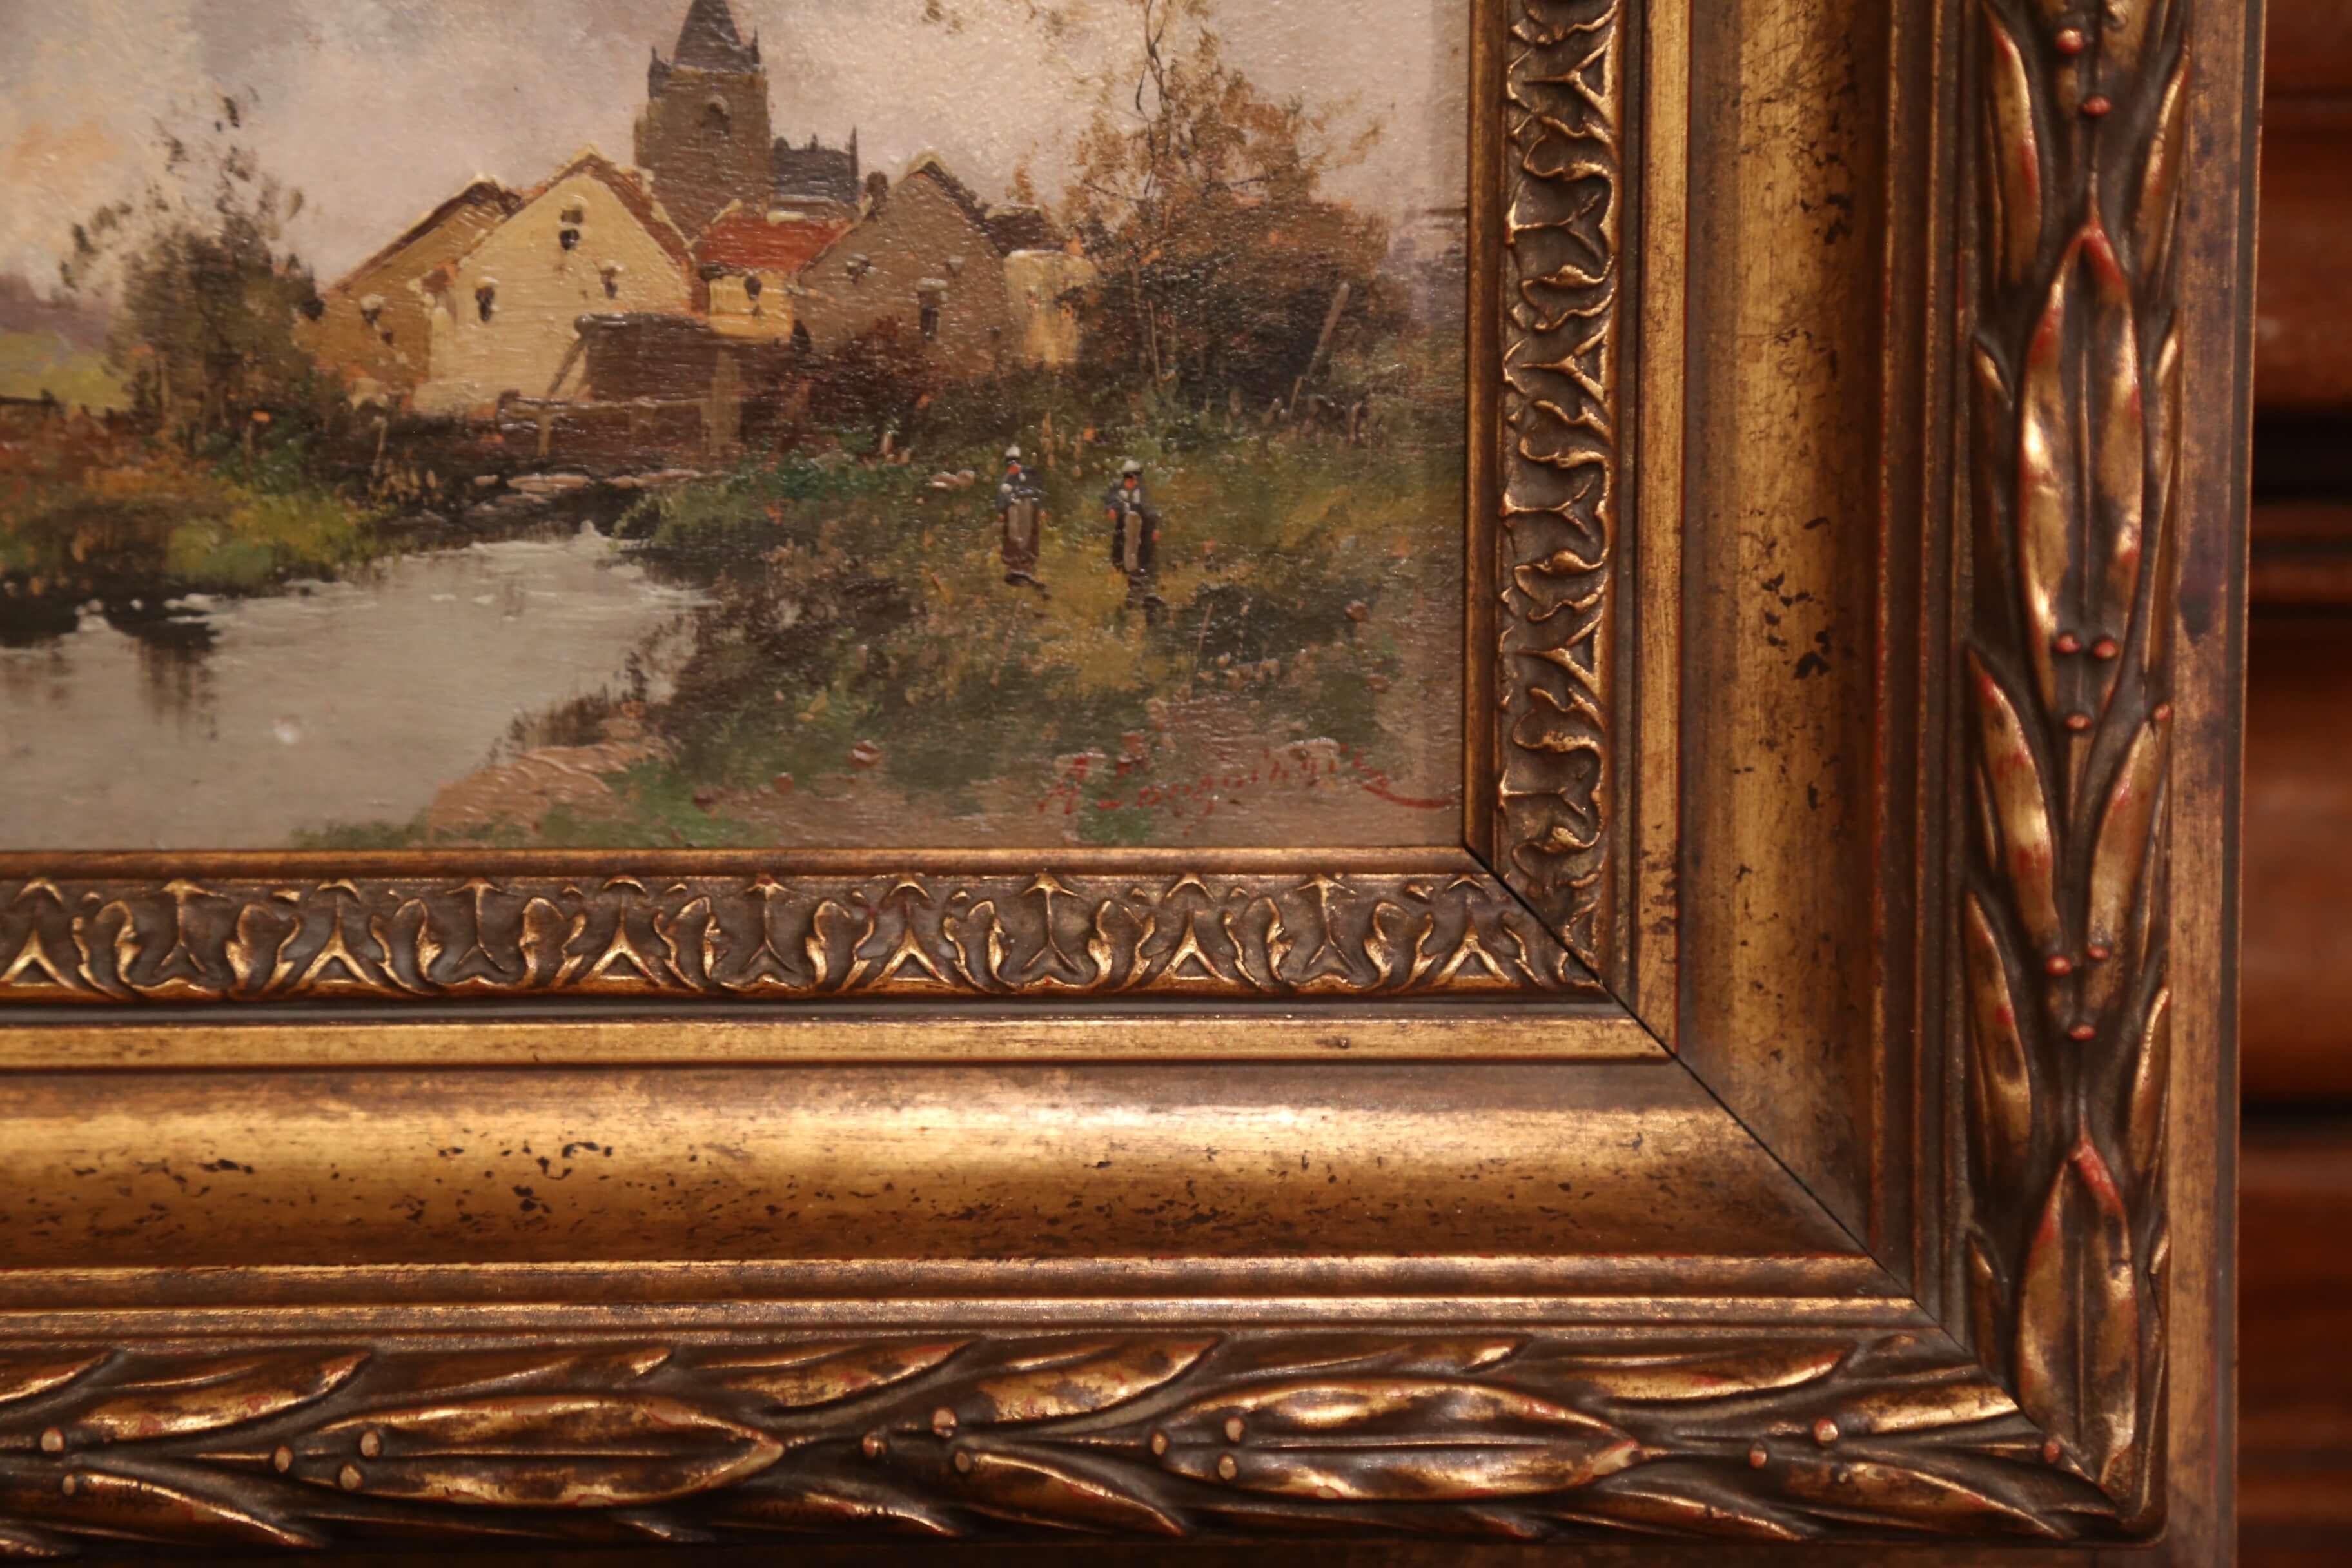 Hand-Painted Pair of 19th Century French Oil on Board in Gilt Frames by E. Galien-Laloue